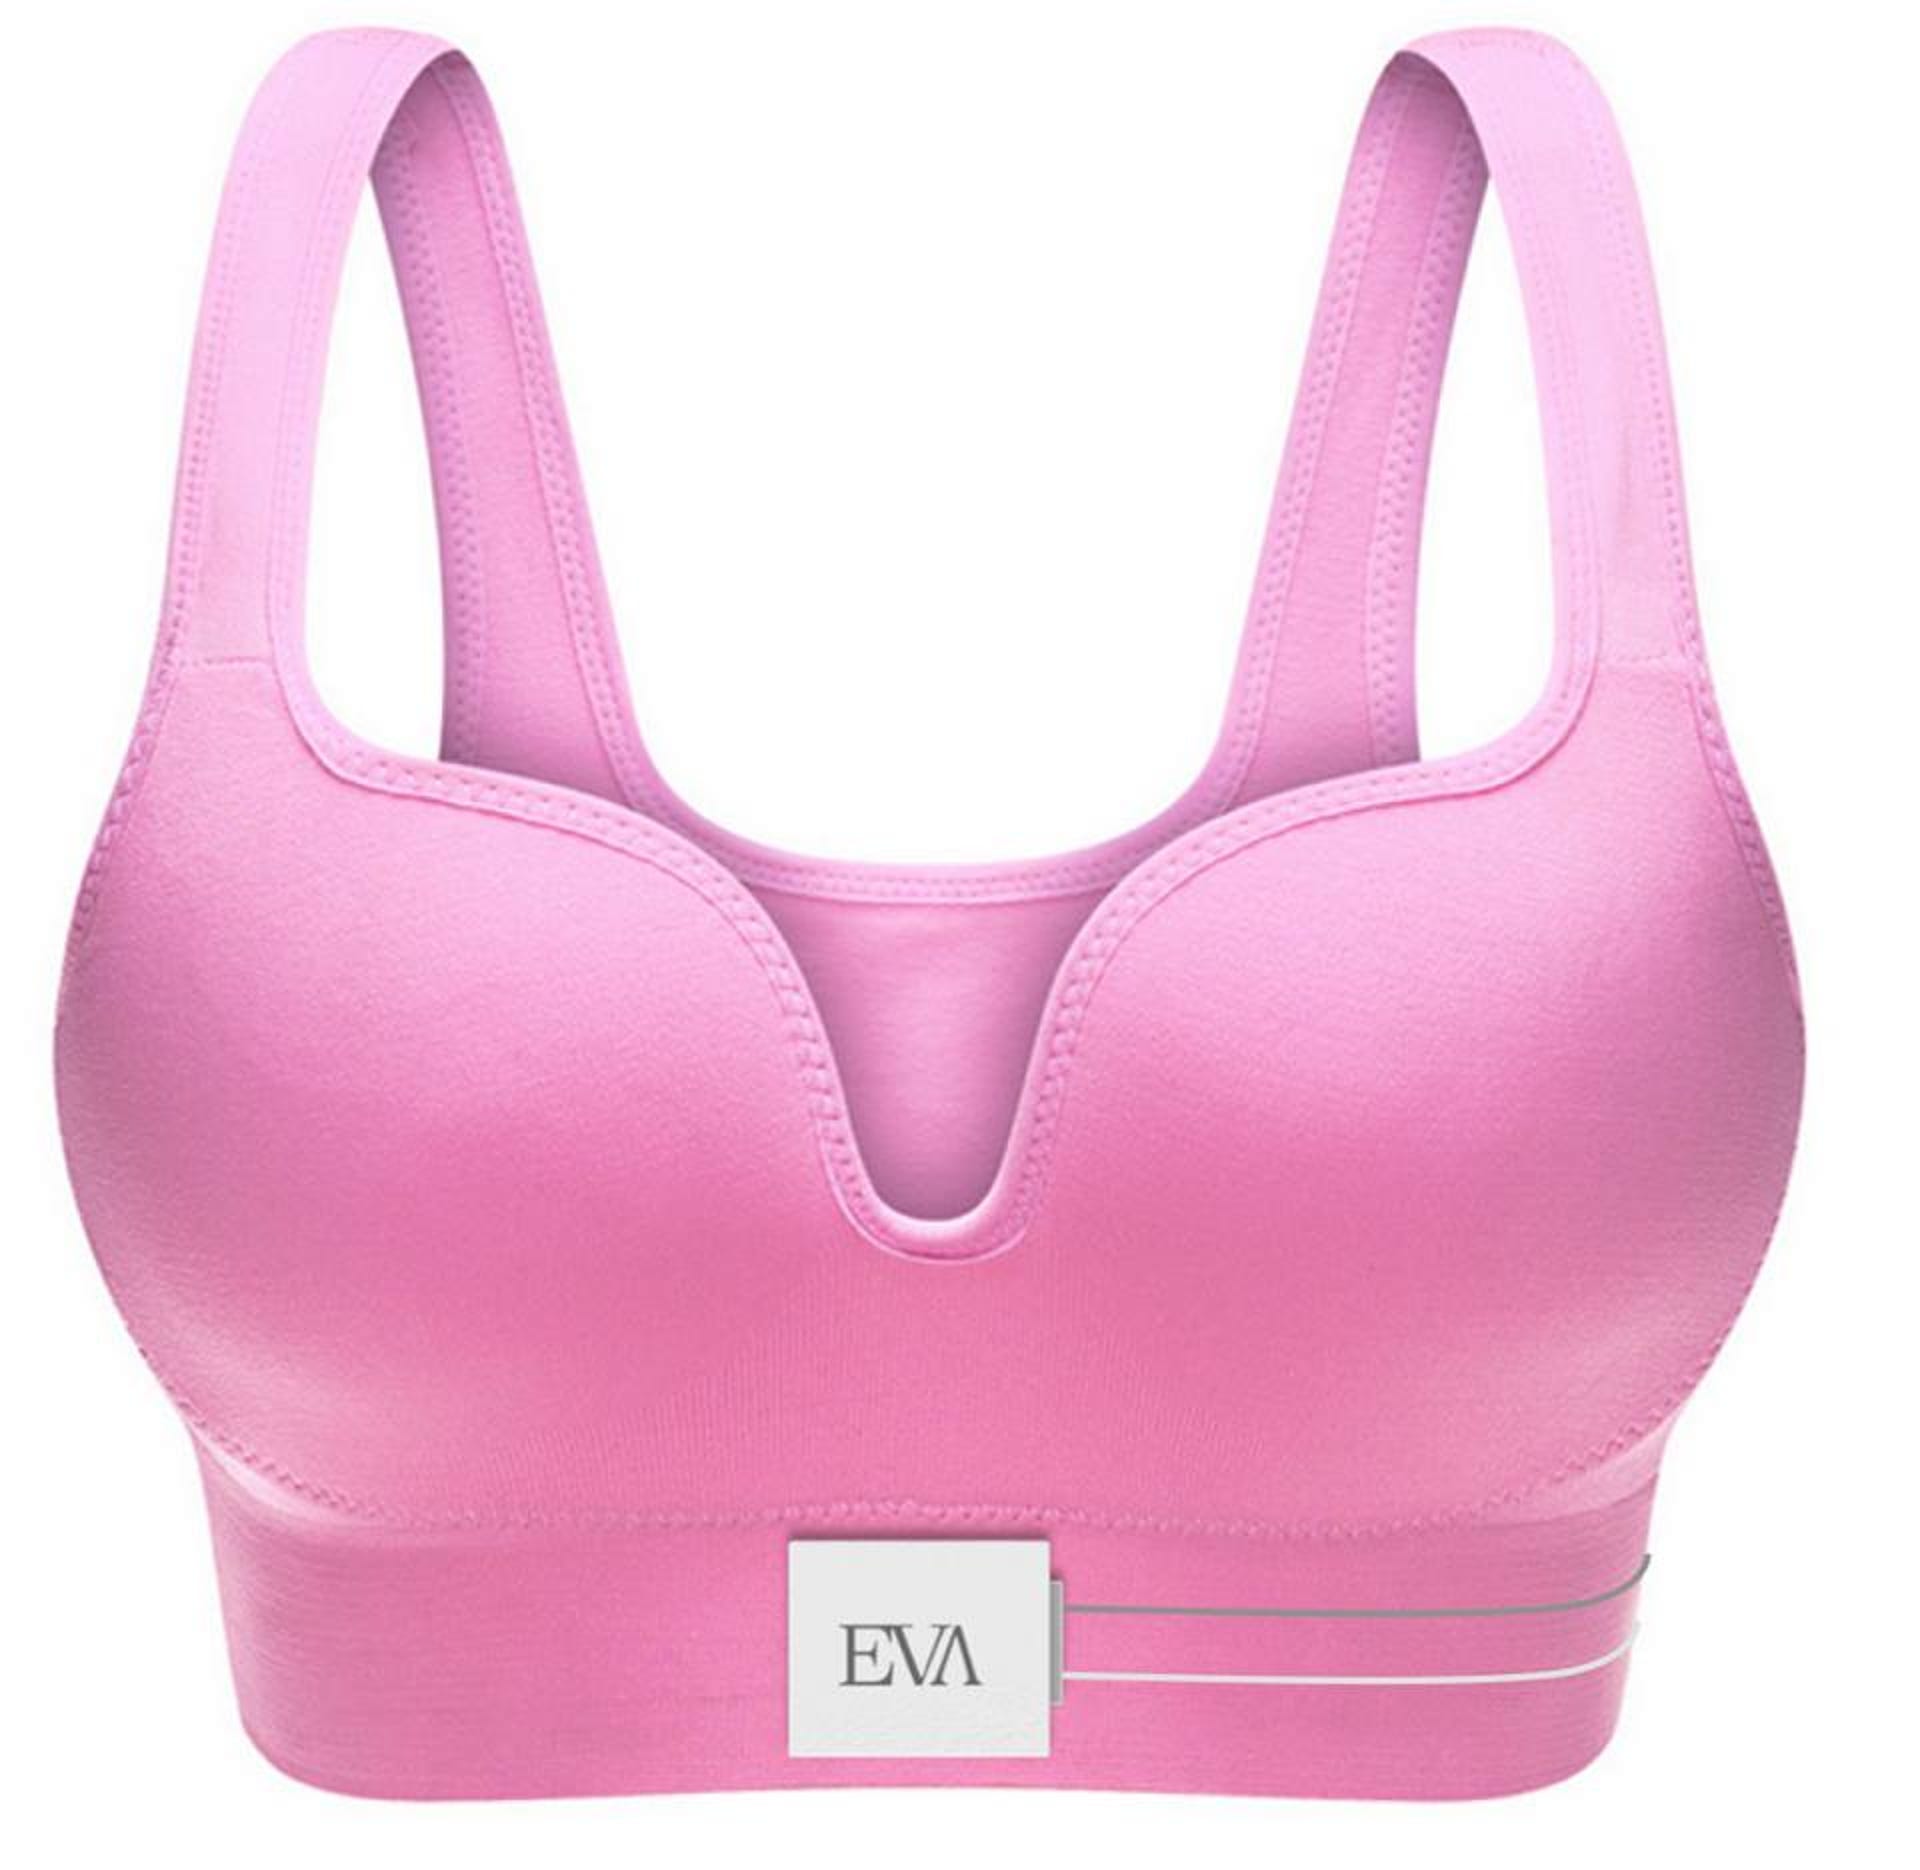 Teen invents bra that could detect breast cancer early - CNET